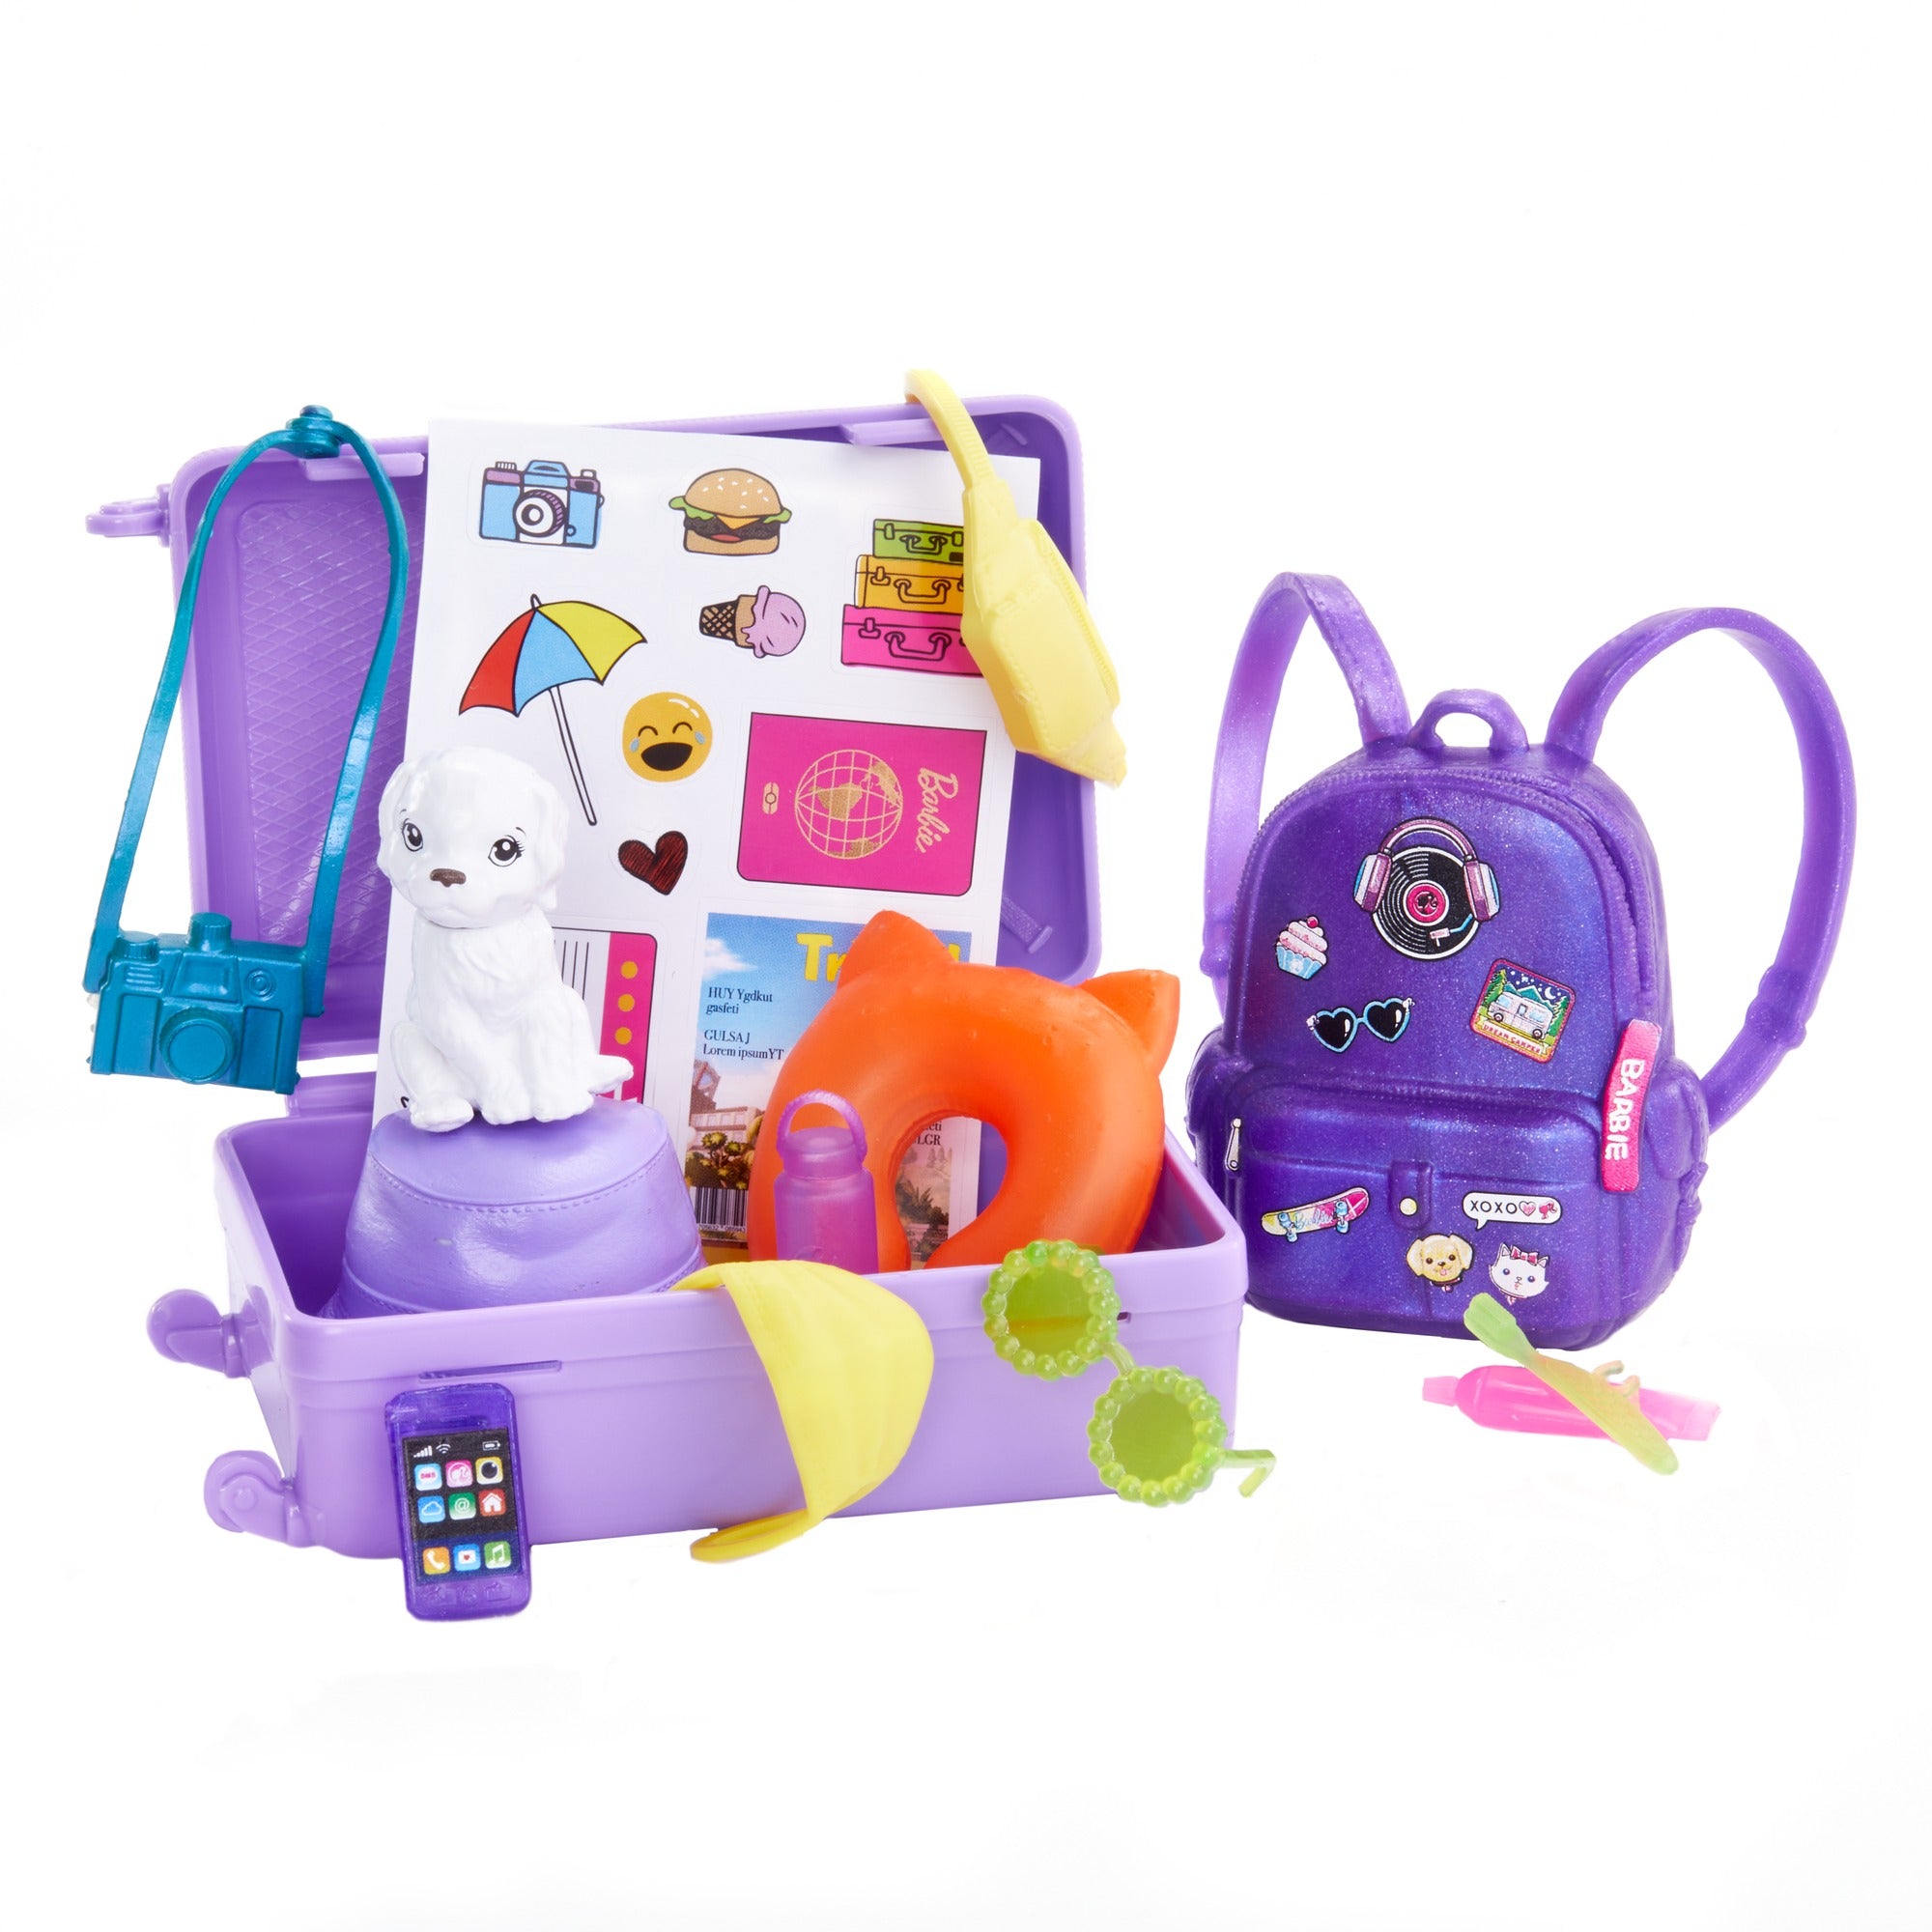 Barbie Travel Set with Teresa Doll, Puppy and Accessories for Kids Ages 3+